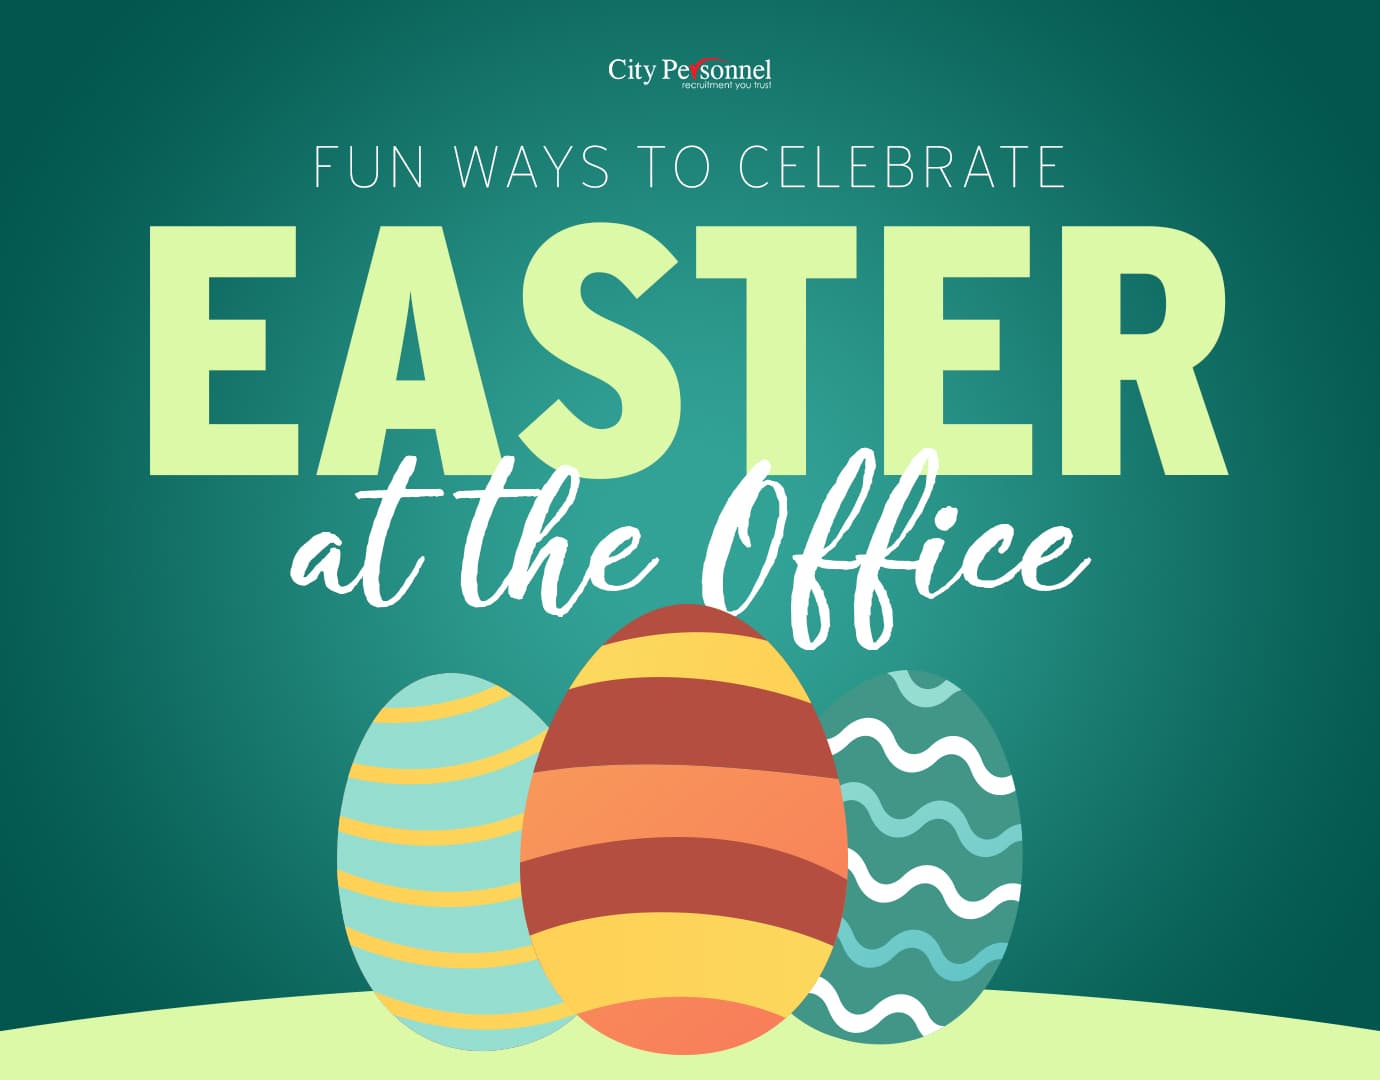 Fun Ways to Celebrate Easter at the Office